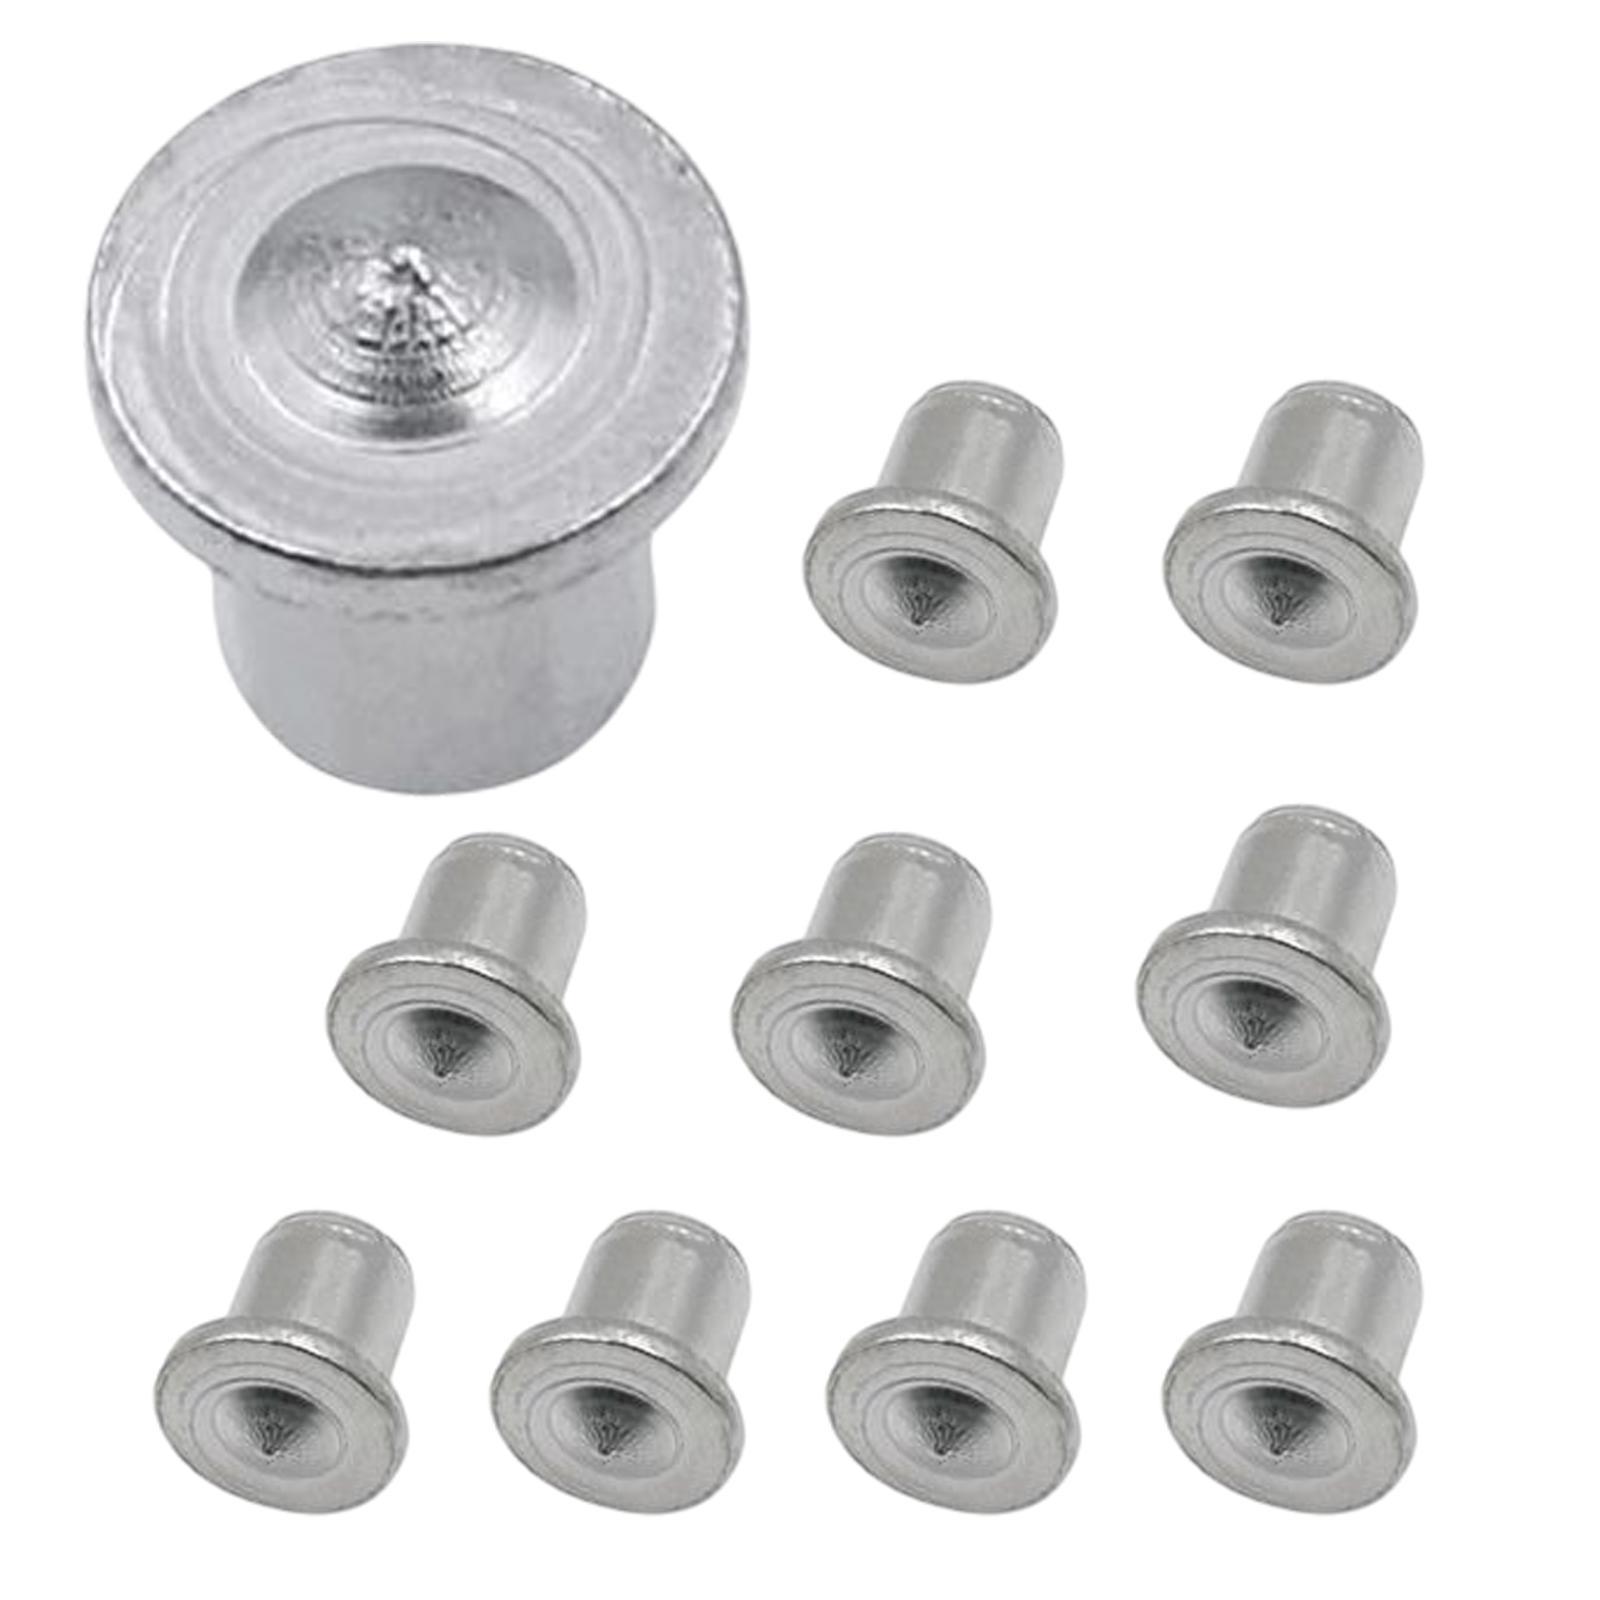 10Pcs Portable Center Dowel Pins Dowel Drill Points Pin for Woodworking